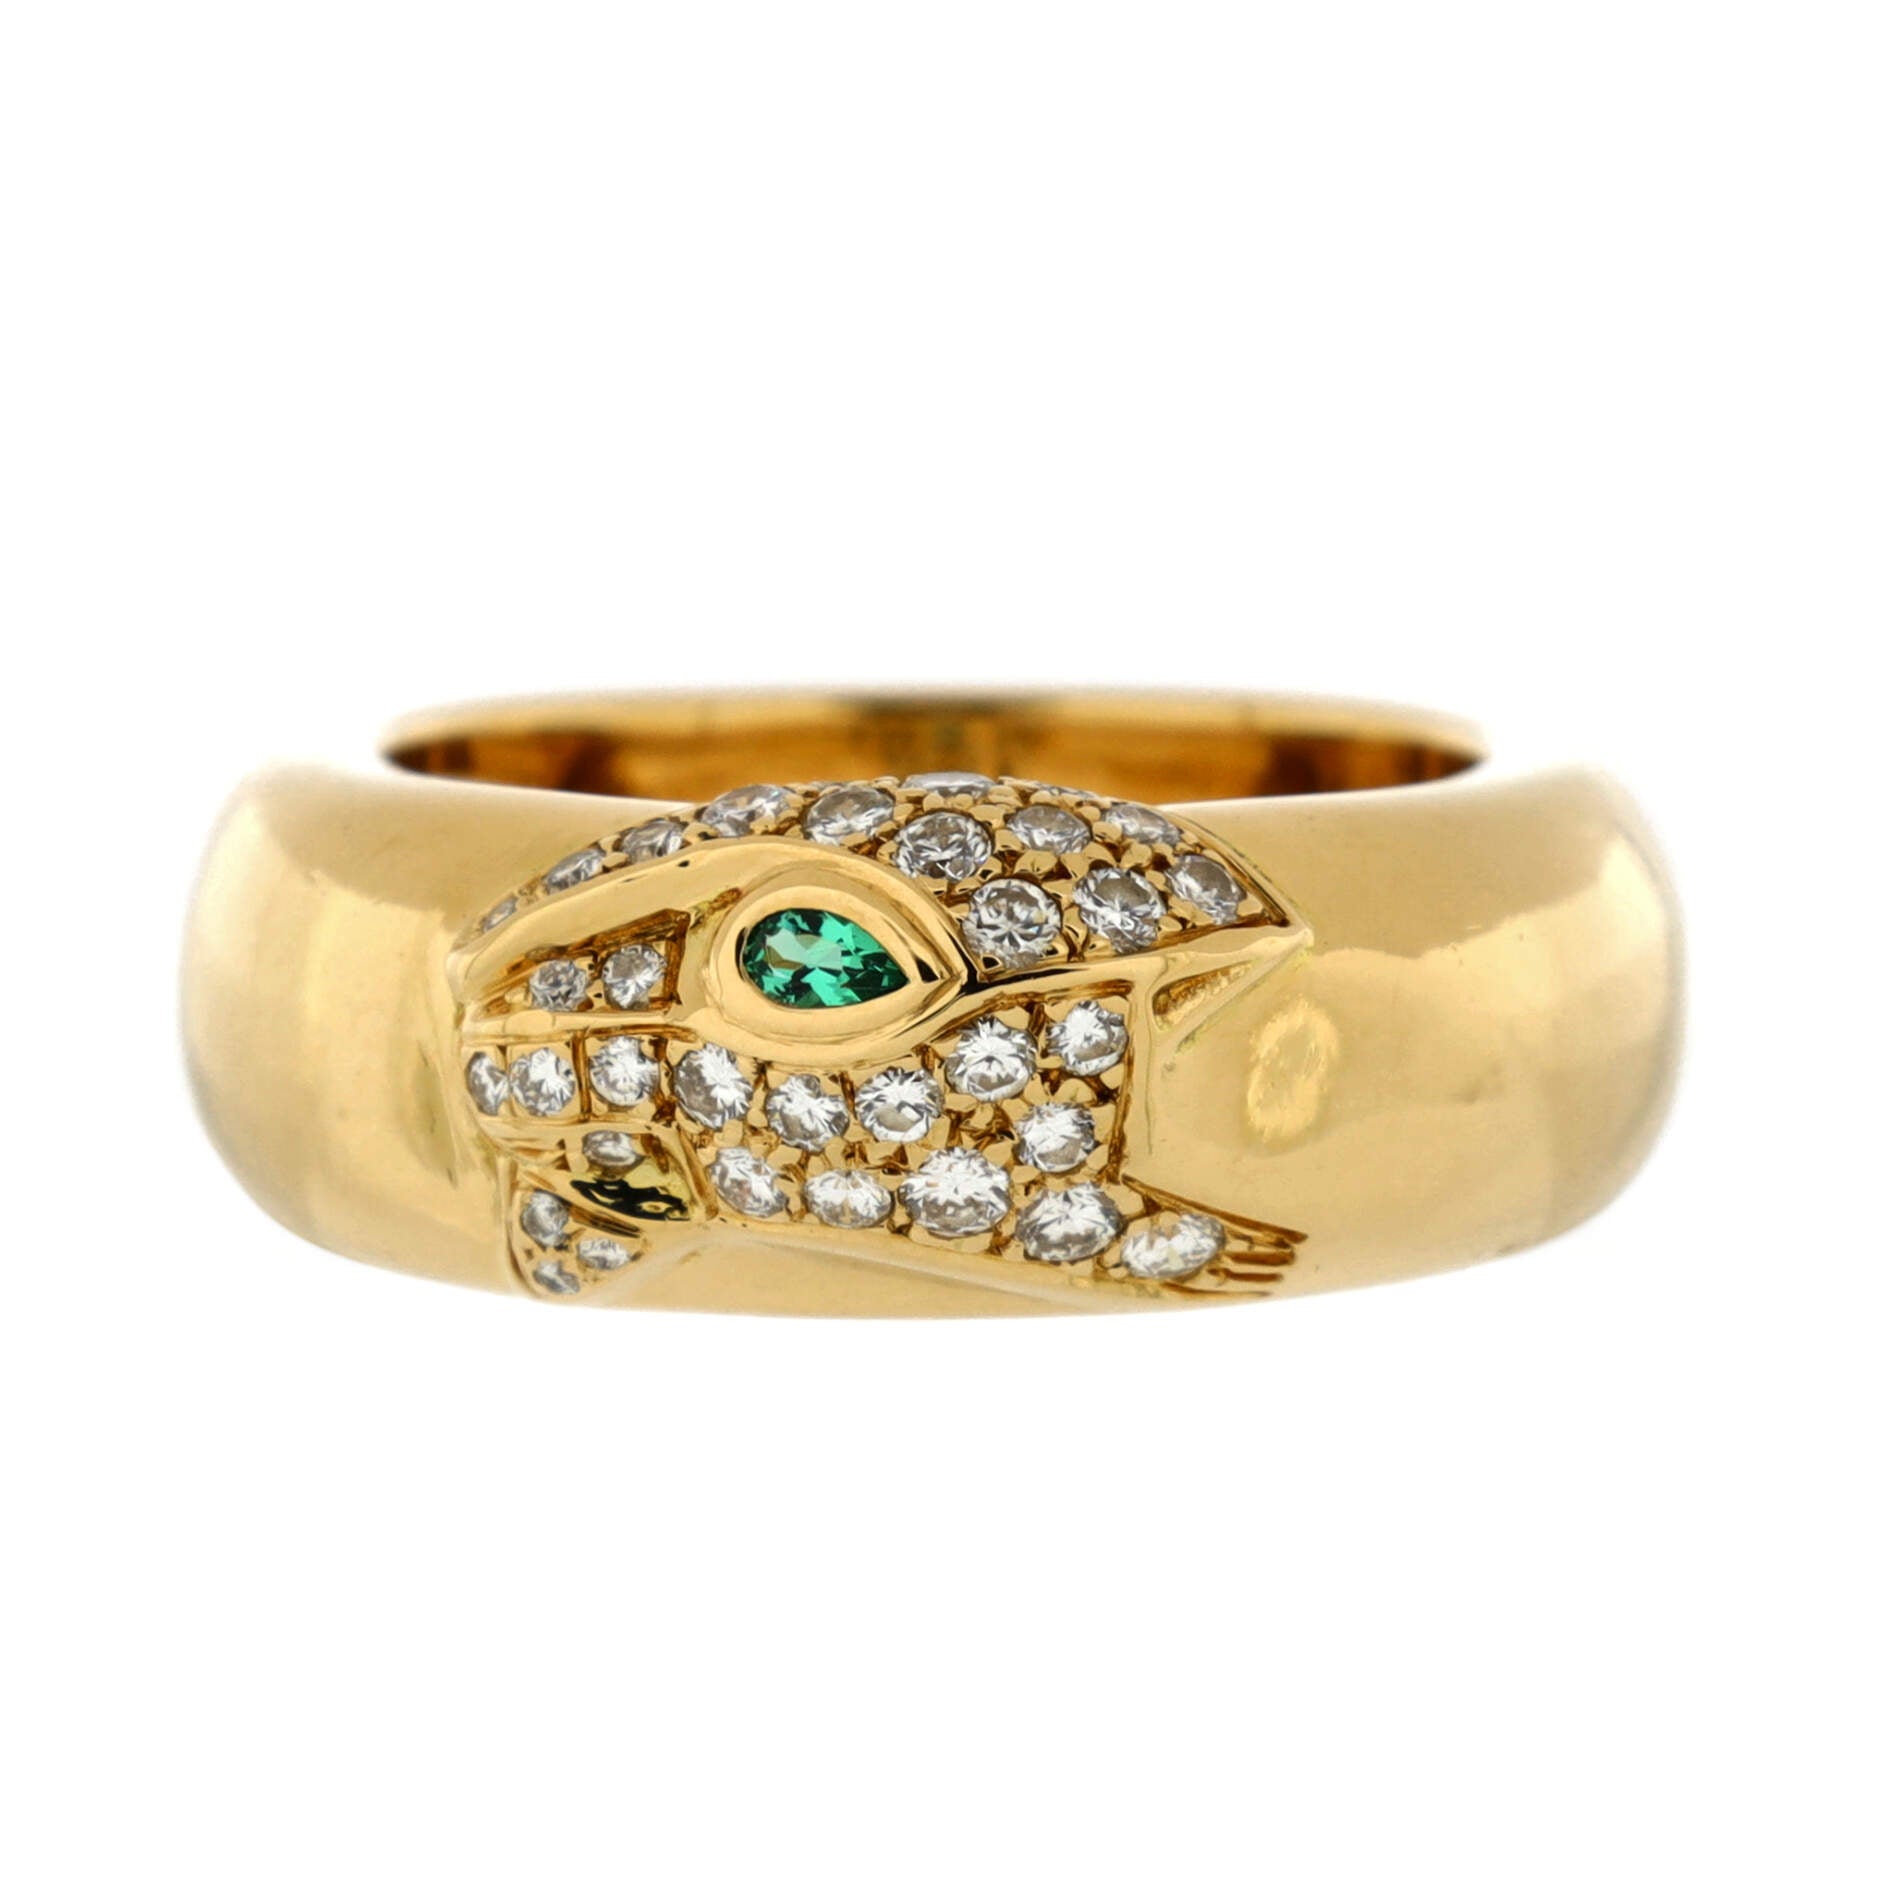 Vintage Panthere de Cartier Band Ring